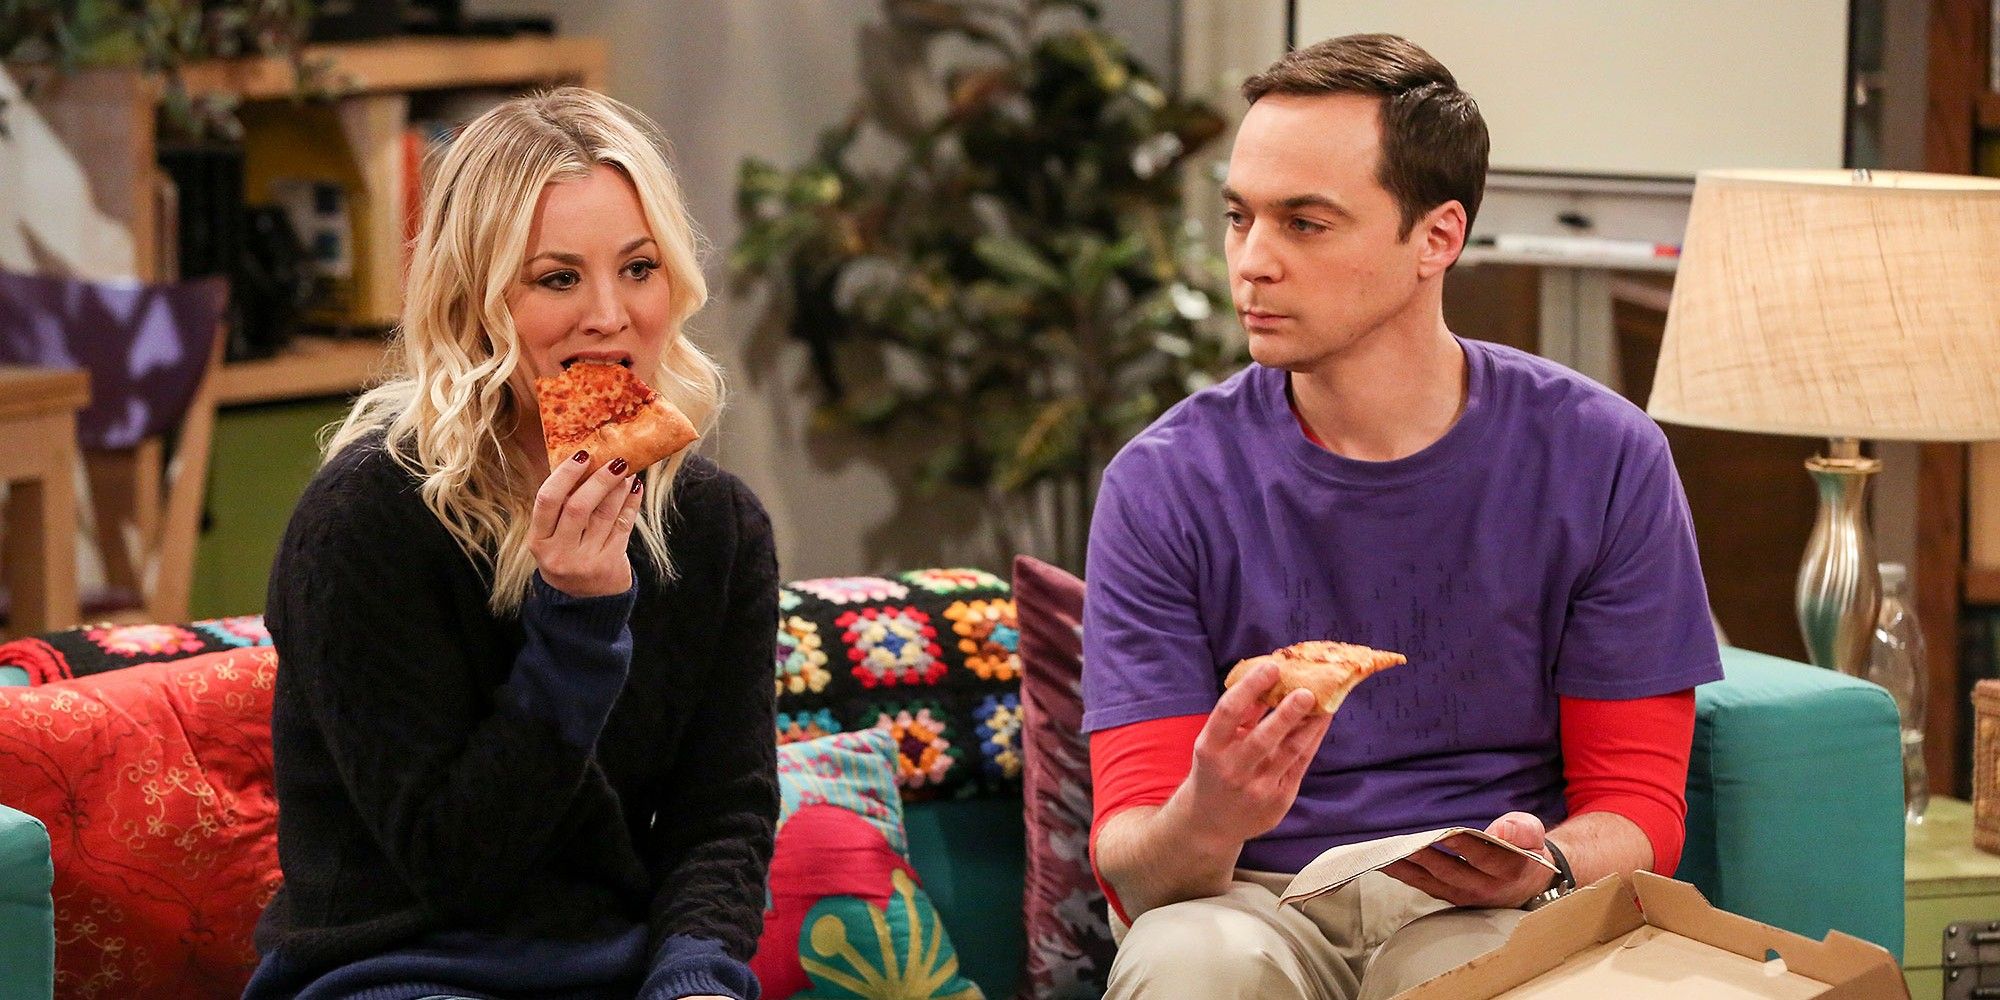 Penny and Sheldon eating pizza on the sofa from TBBT